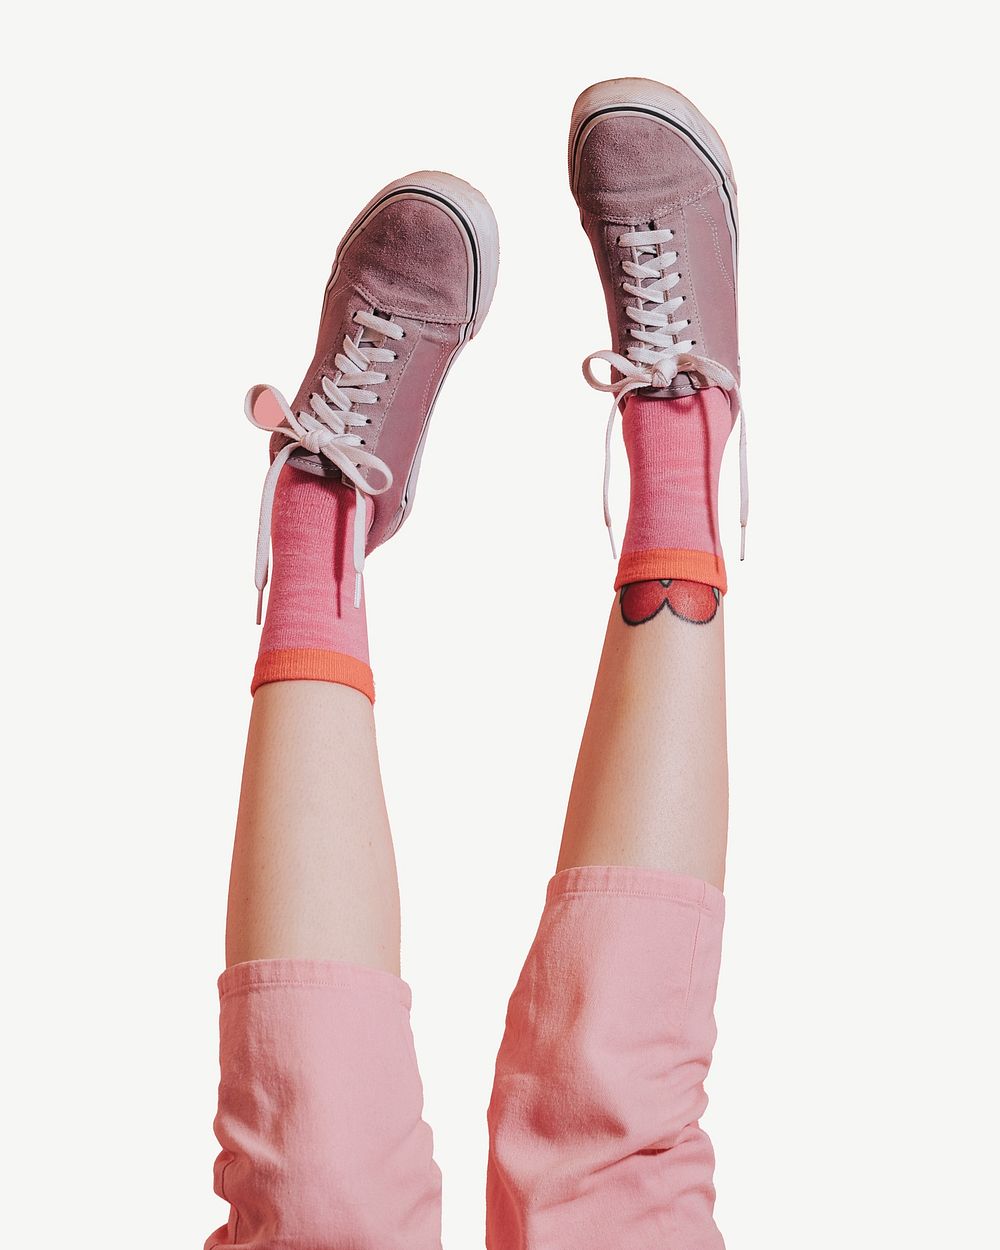 Pink canvas sneakers collage element psd